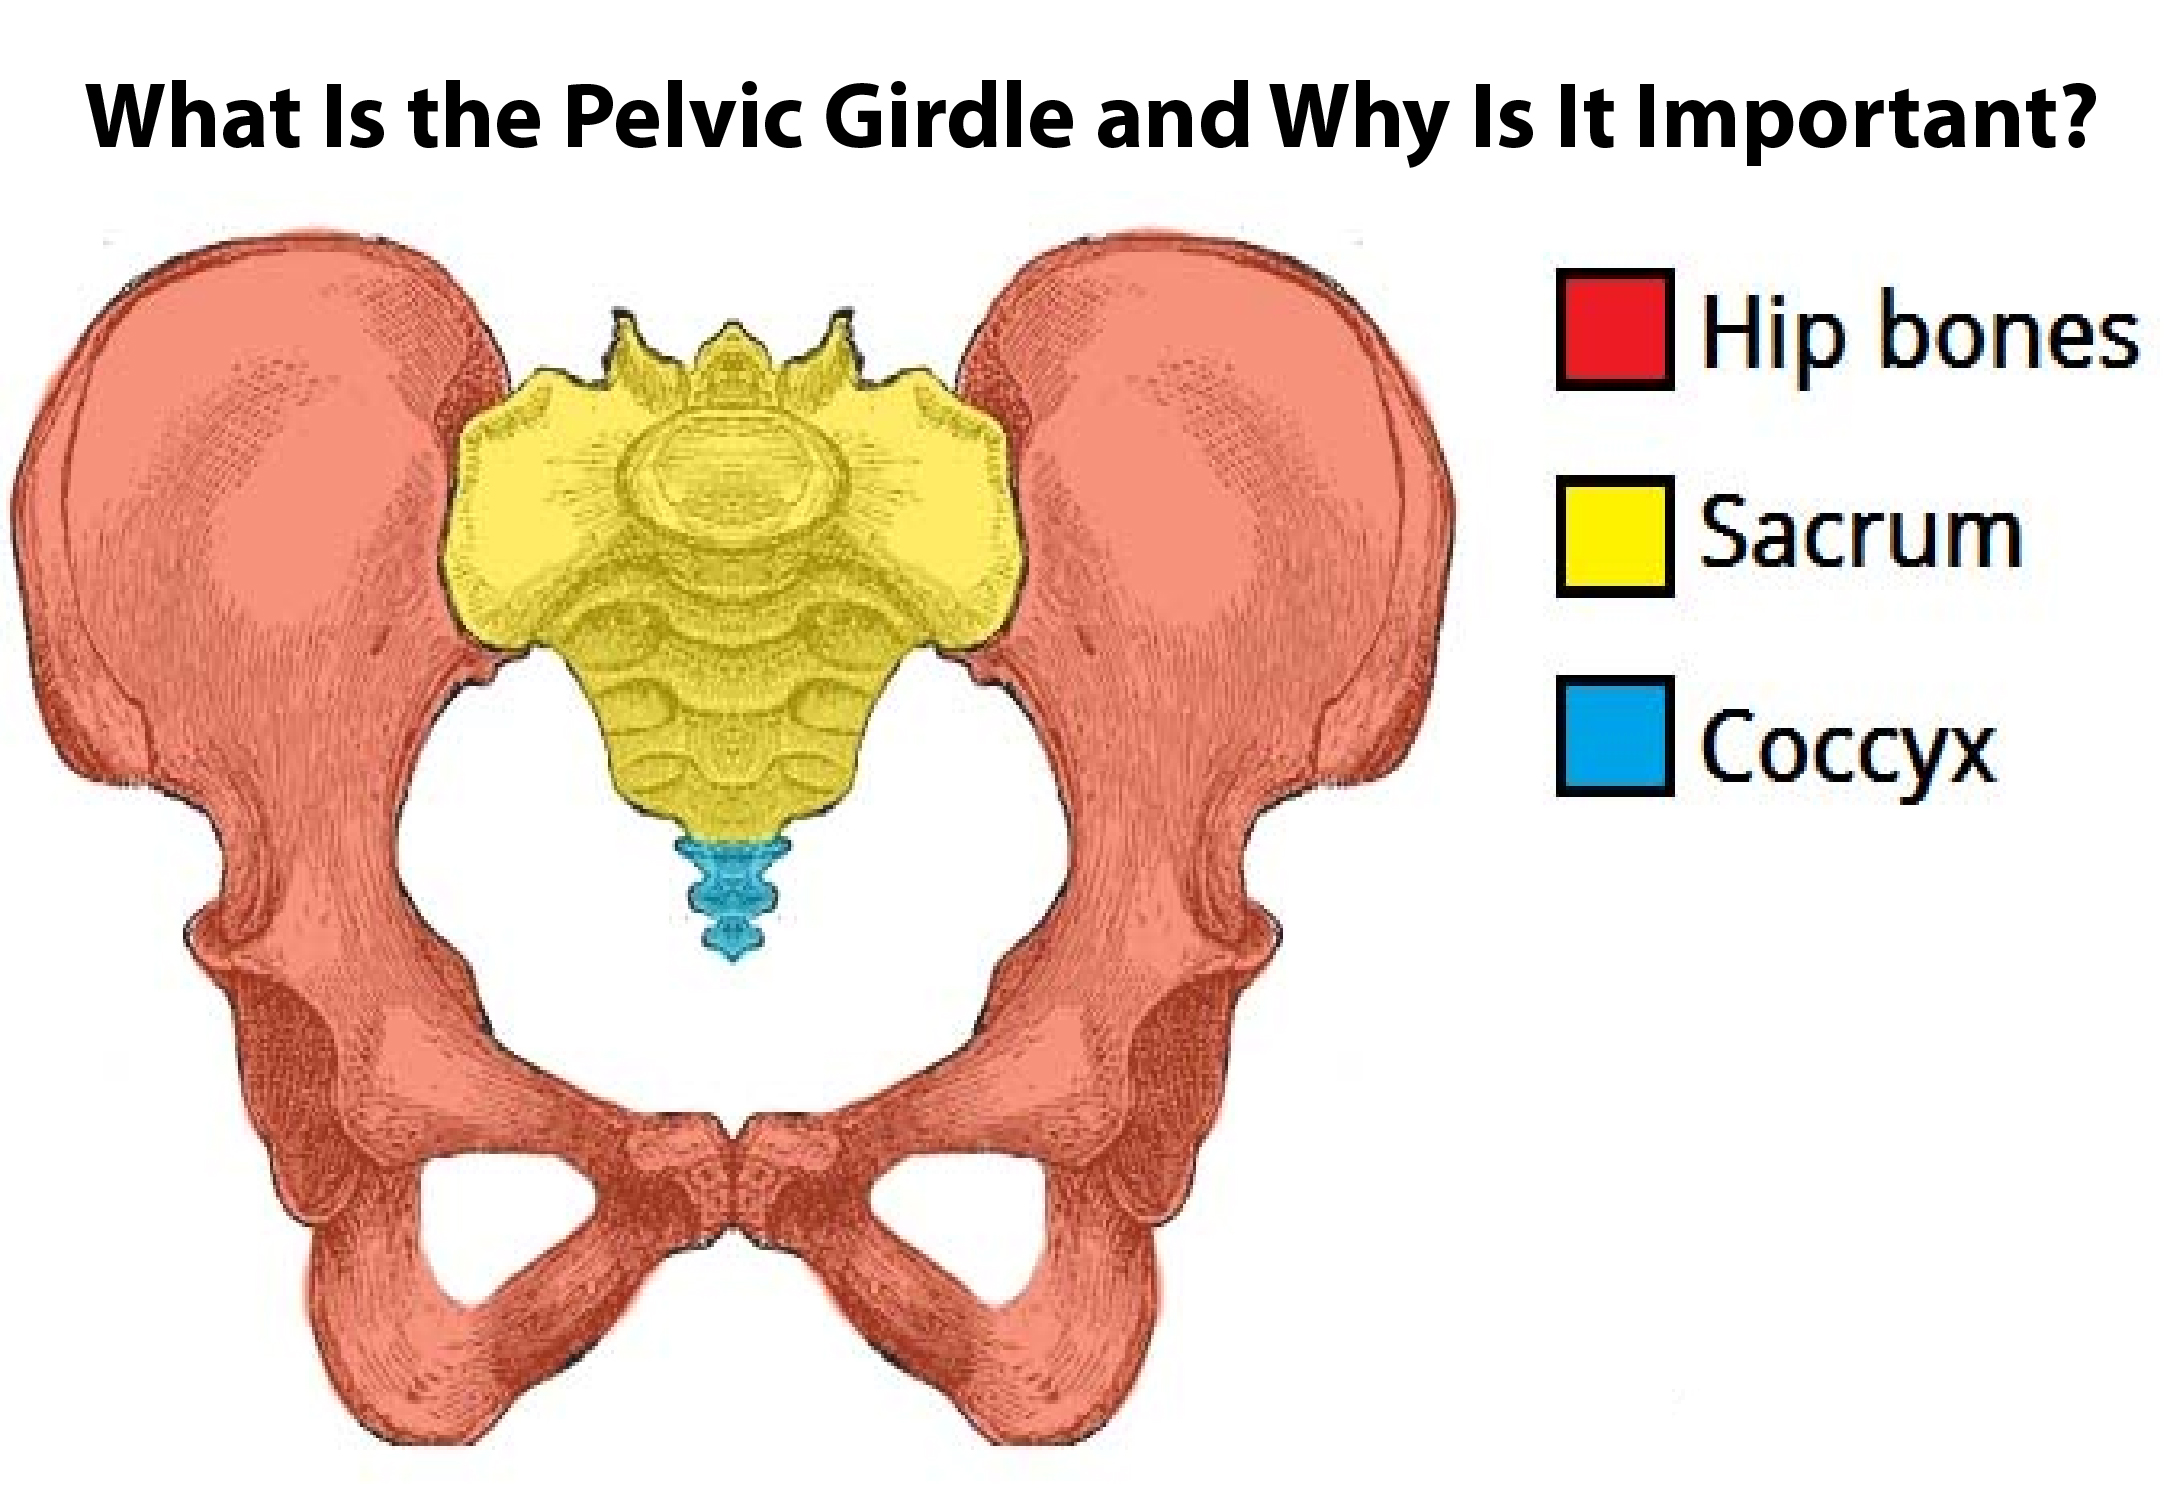 What Is the Pelvic Girdle and Why Is It Important?